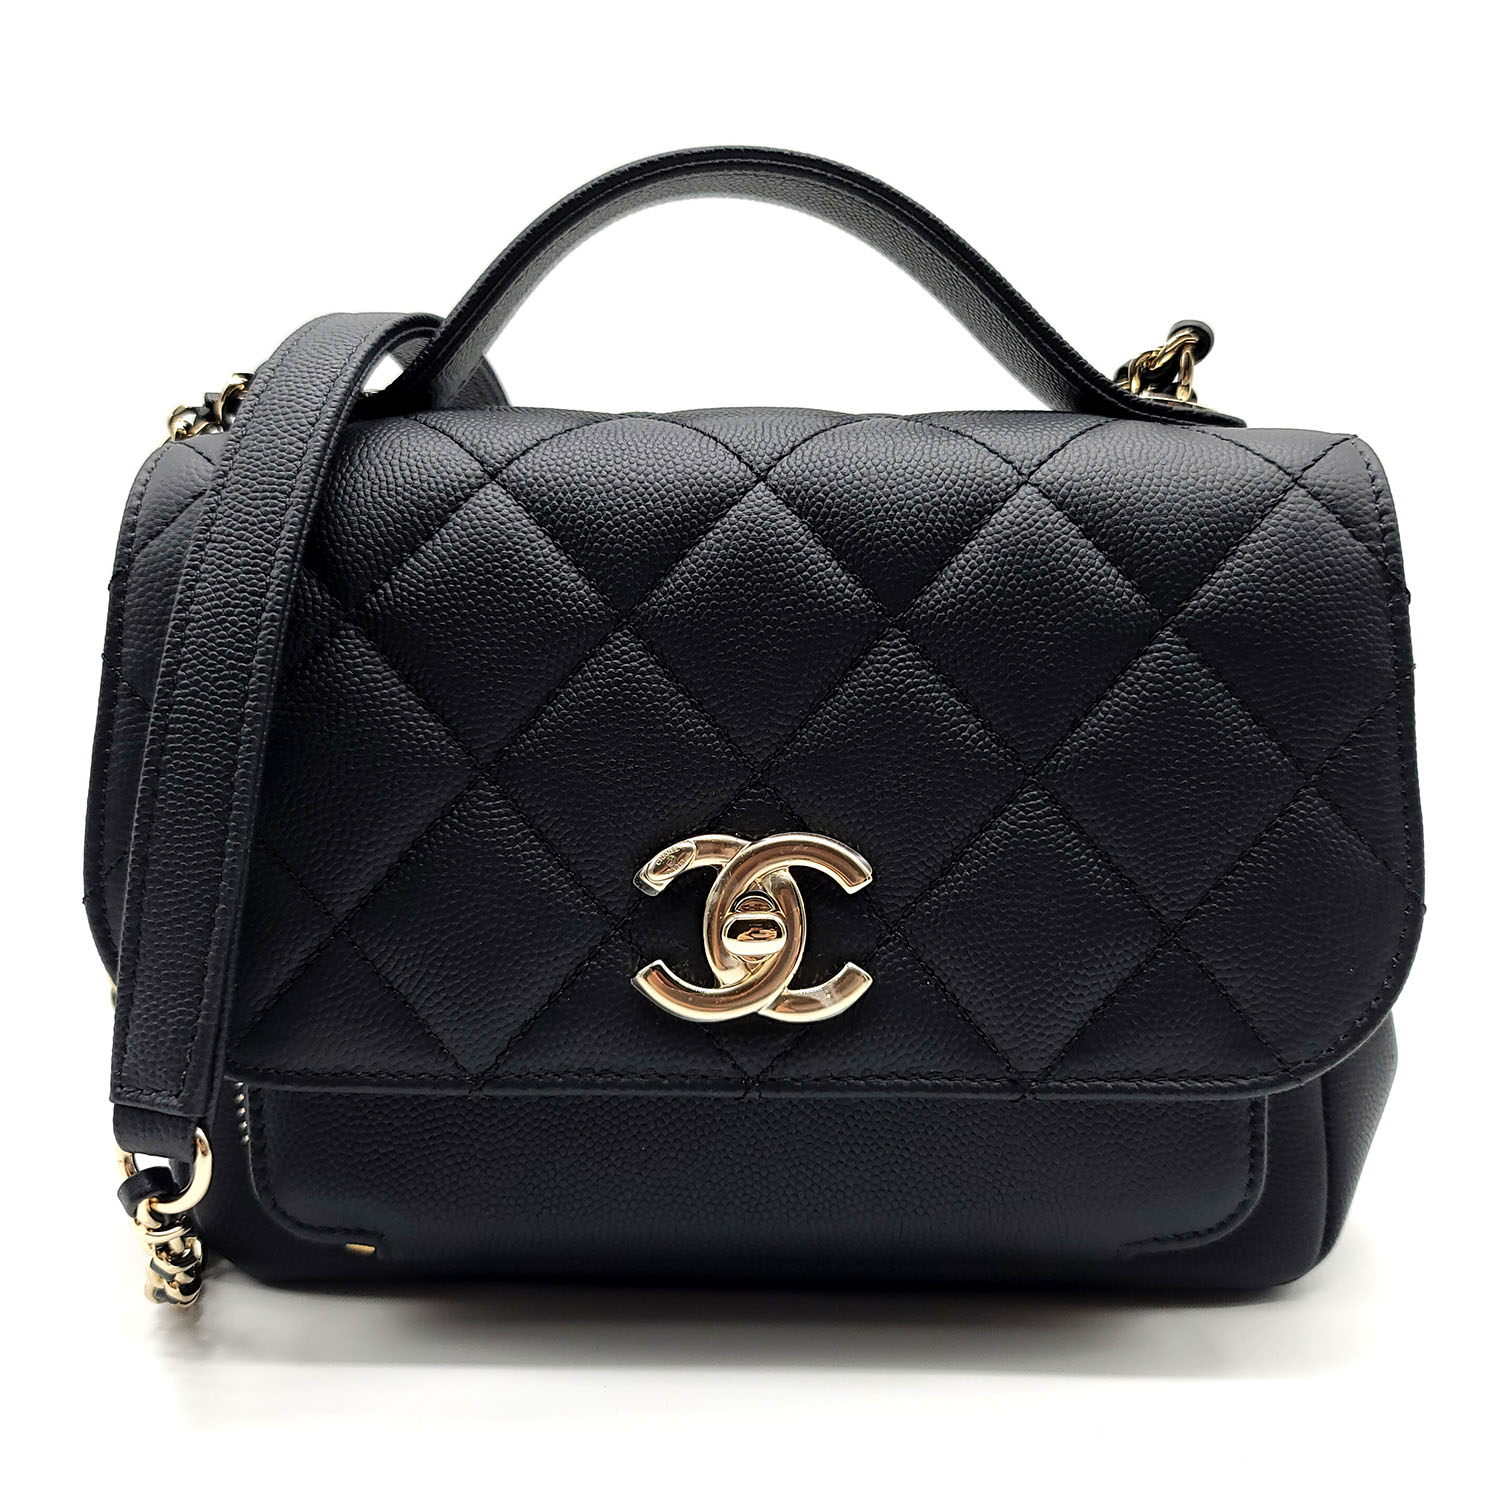 Chanel - Authenticated Business Affinity Handbag - Leather Black For Woman, Never Worn